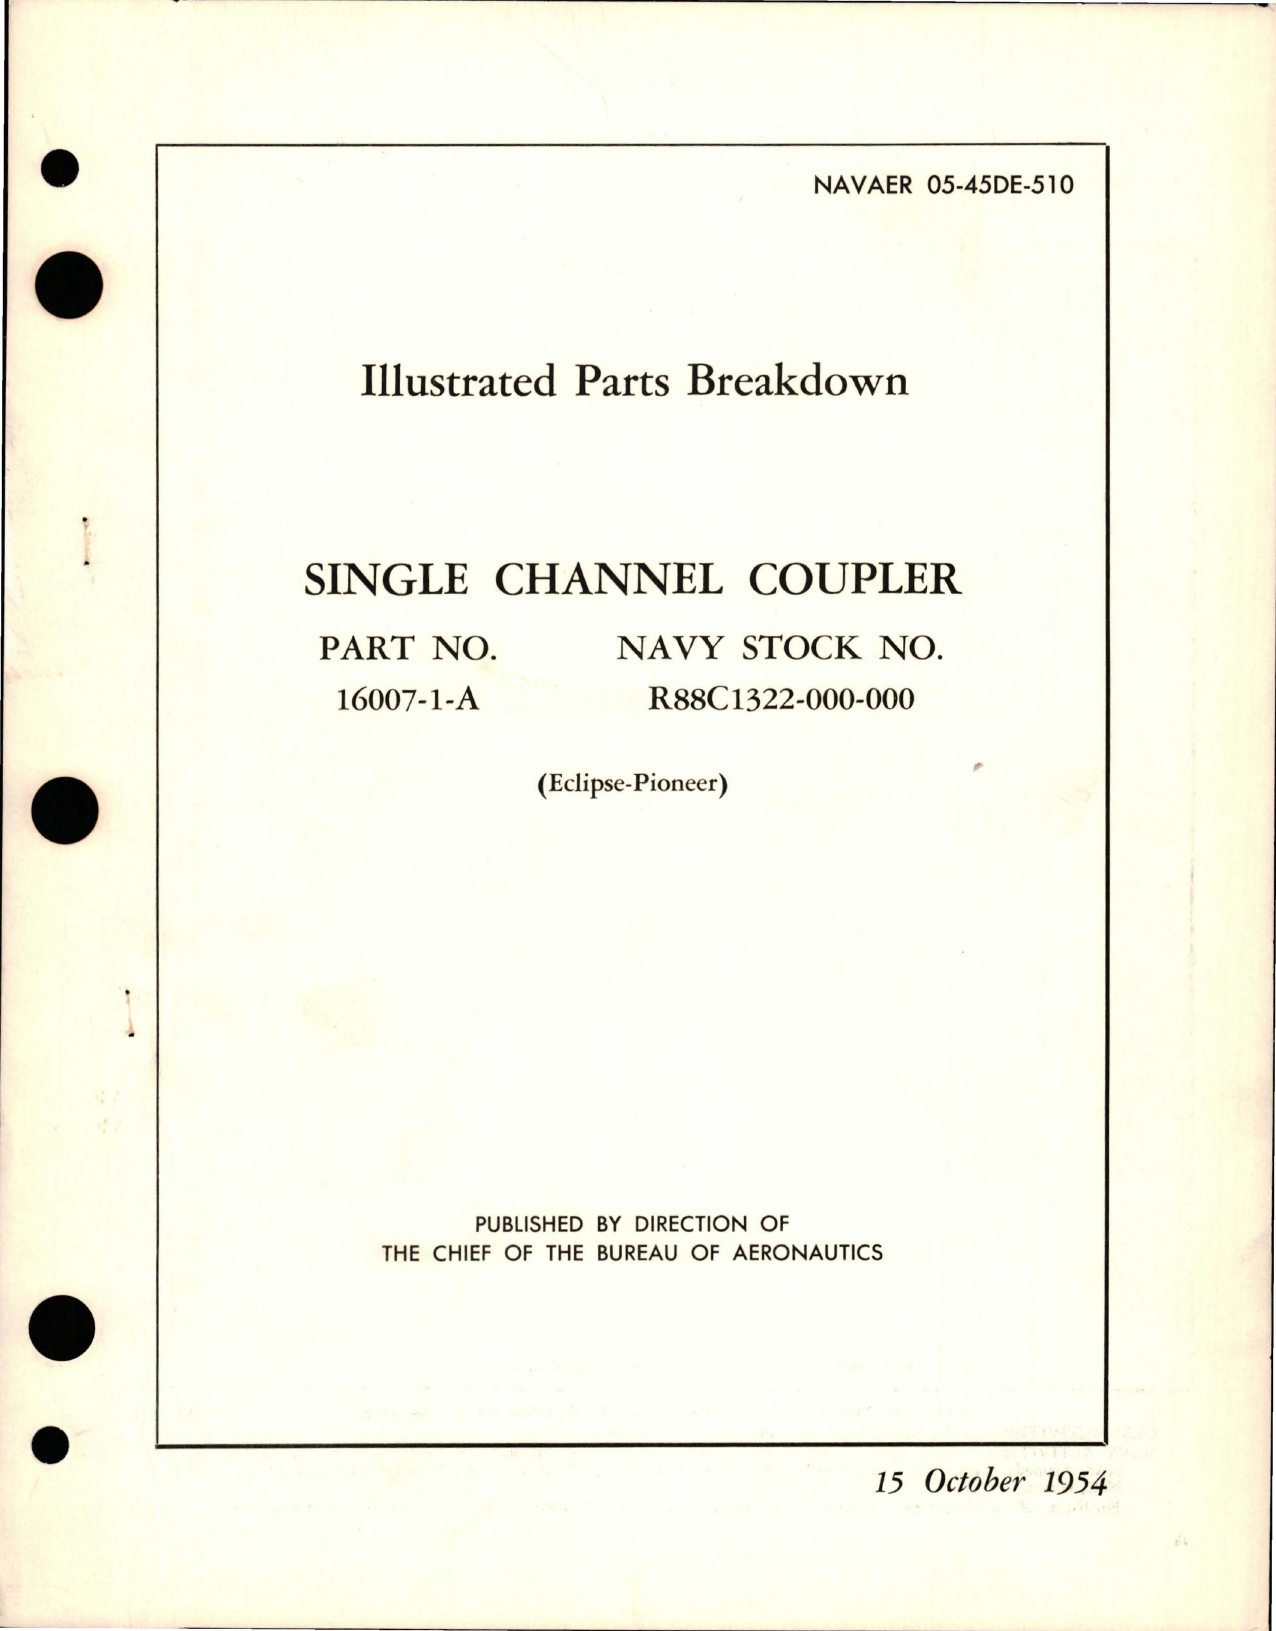 Sample page 1 from AirCorps Library document: Illustrated Parts Breakdown for Single Channel Coupler - Part 16007-1-A